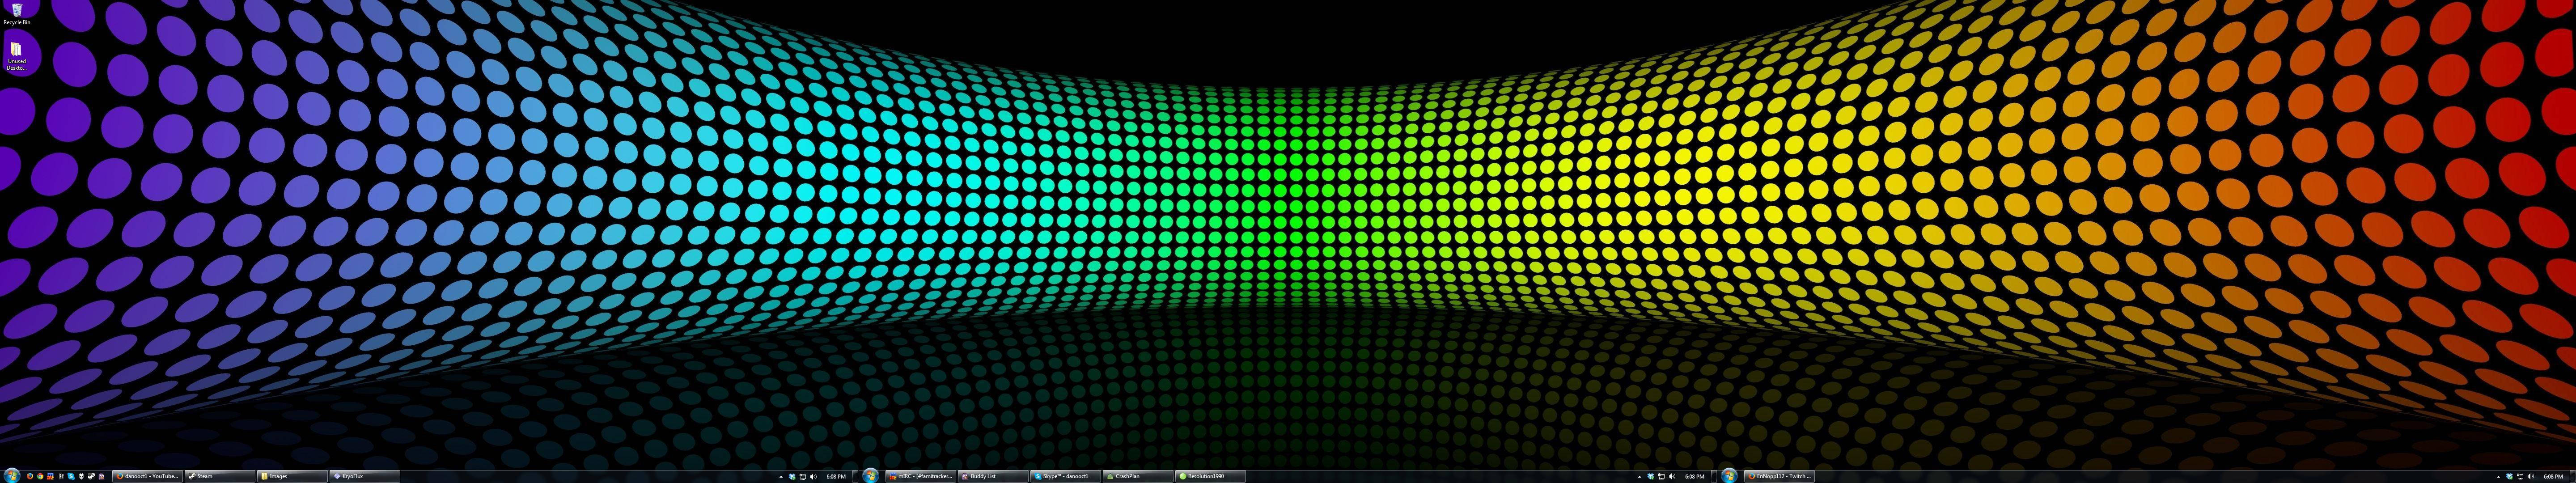 Cool Abstract Rainbow Tube Background